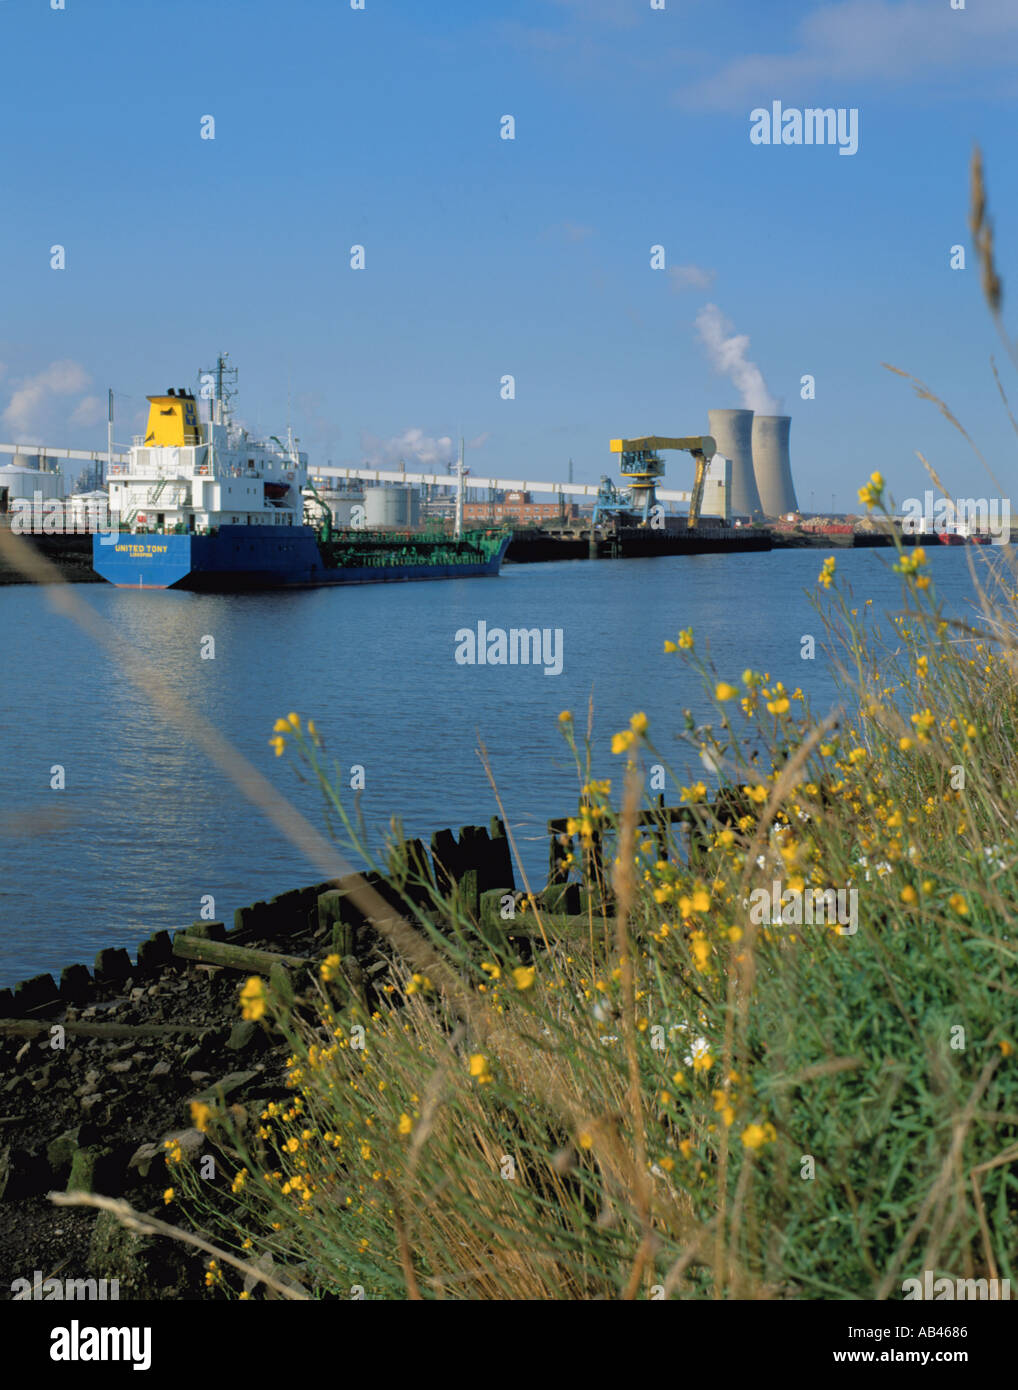 Swedish freighter on River Tees beside Billingham chemical complex, Billingham, Teesside, Cleveland, England, UK. in 1990s Stock Photo